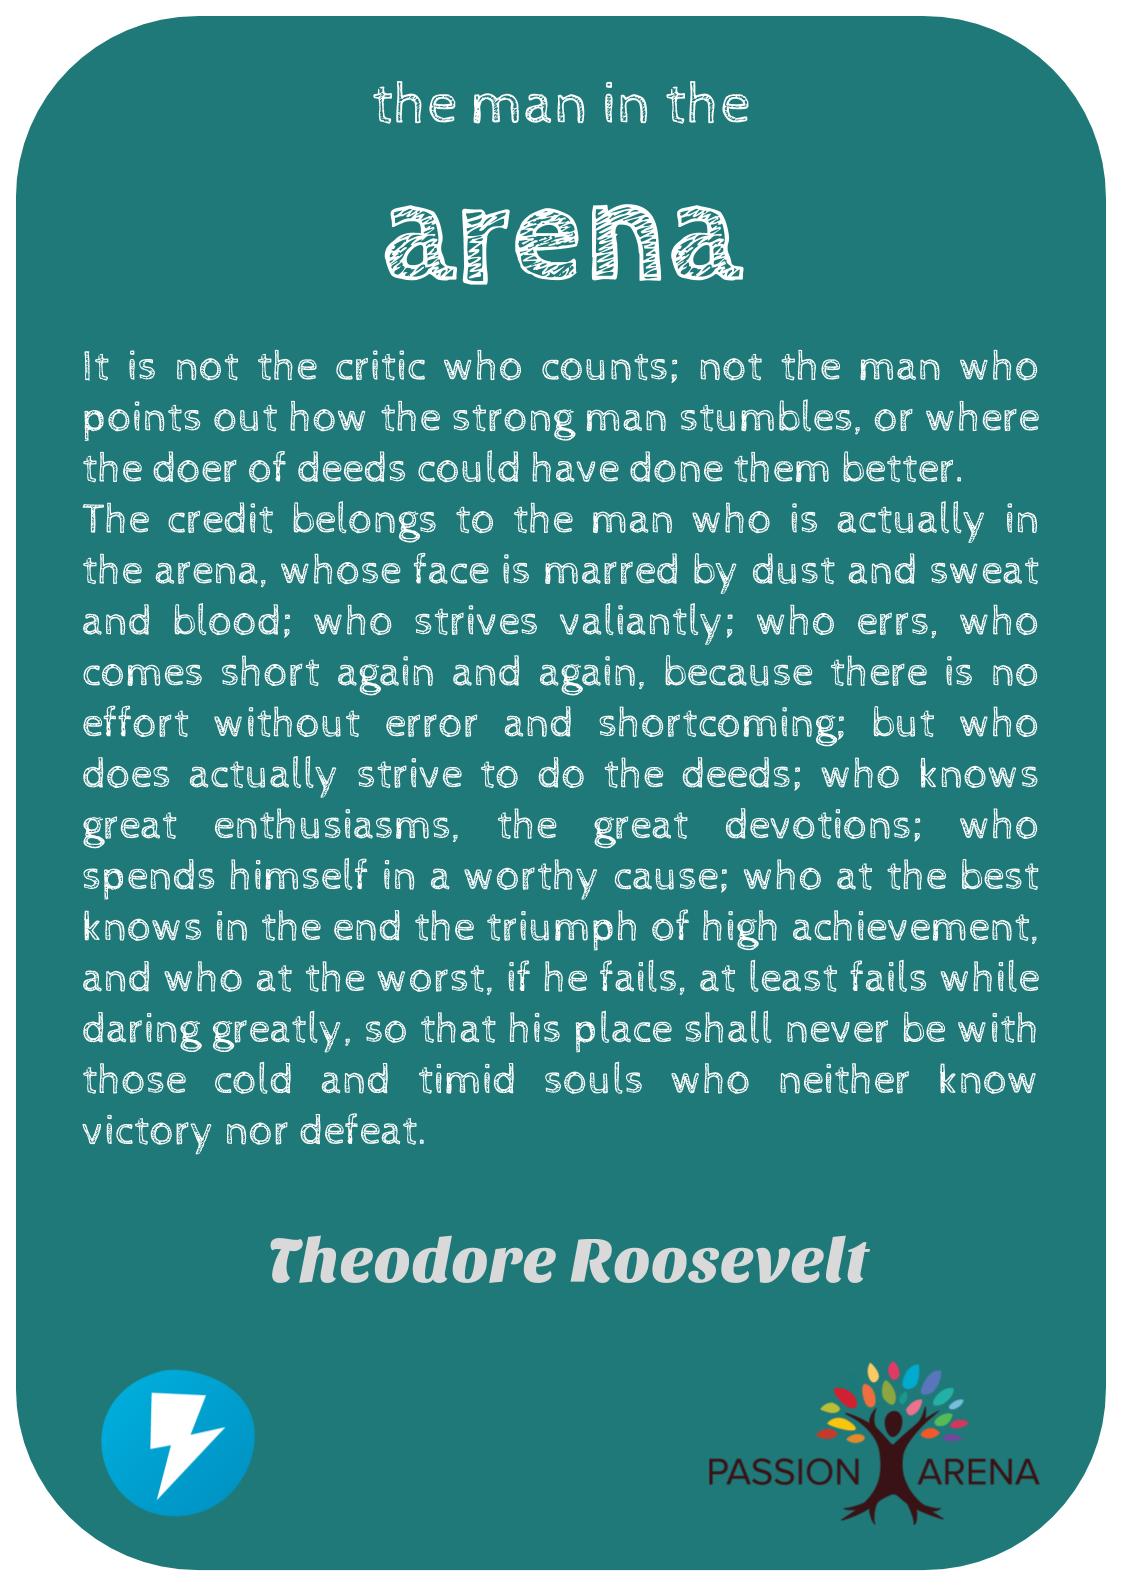 Theodore Roosevelt - 'The Man In The Arena' Quote